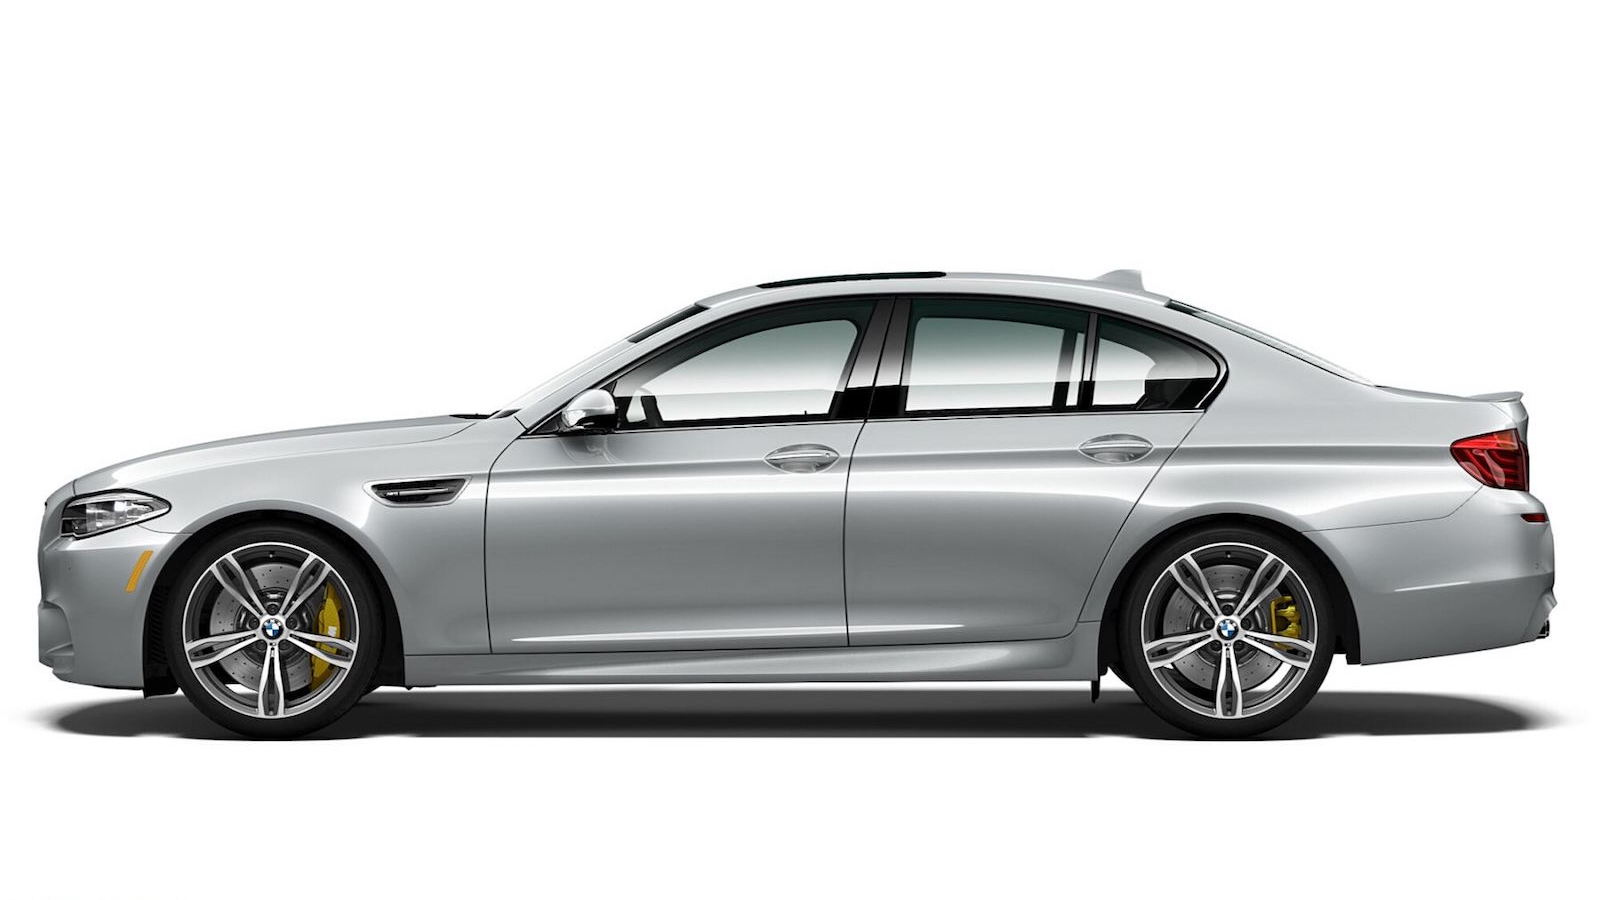 2016 BMW M5 Pure Metal Silver Limited Edition